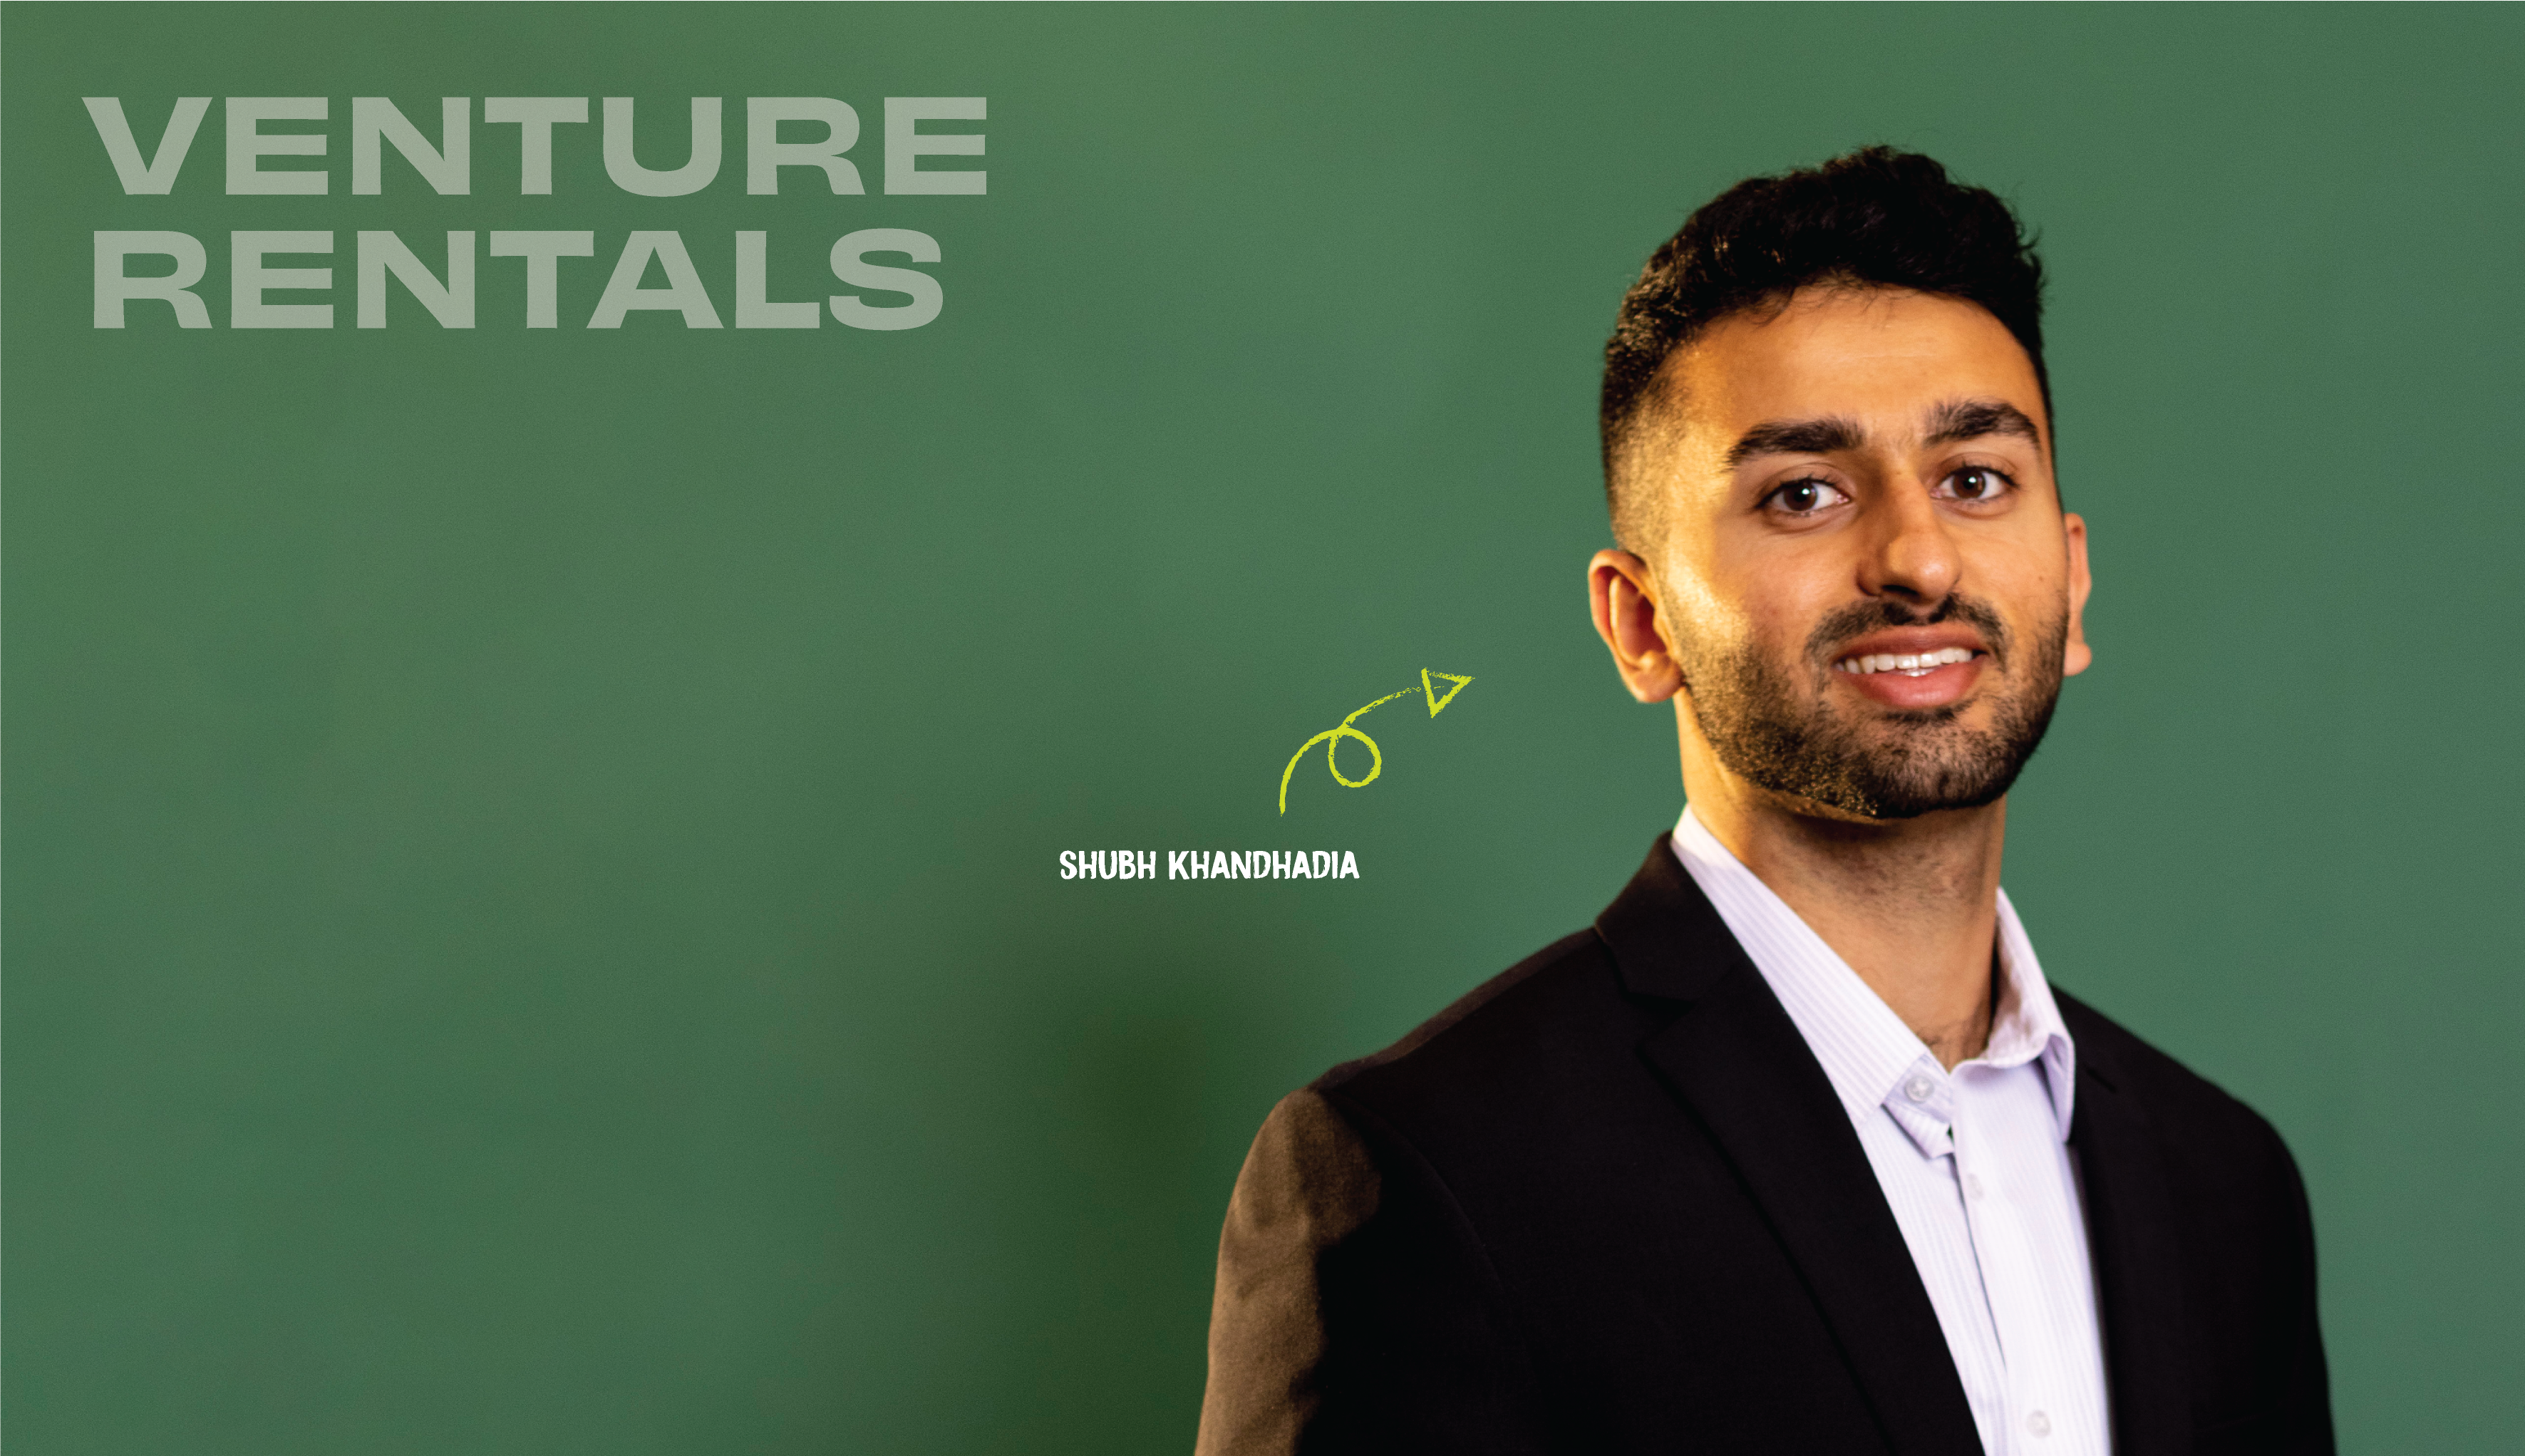 Venture Rent founder Shubh Khandadia standing in front of a green background, with graphics that say "Venture Rent" and "Shubh Khandhadia."